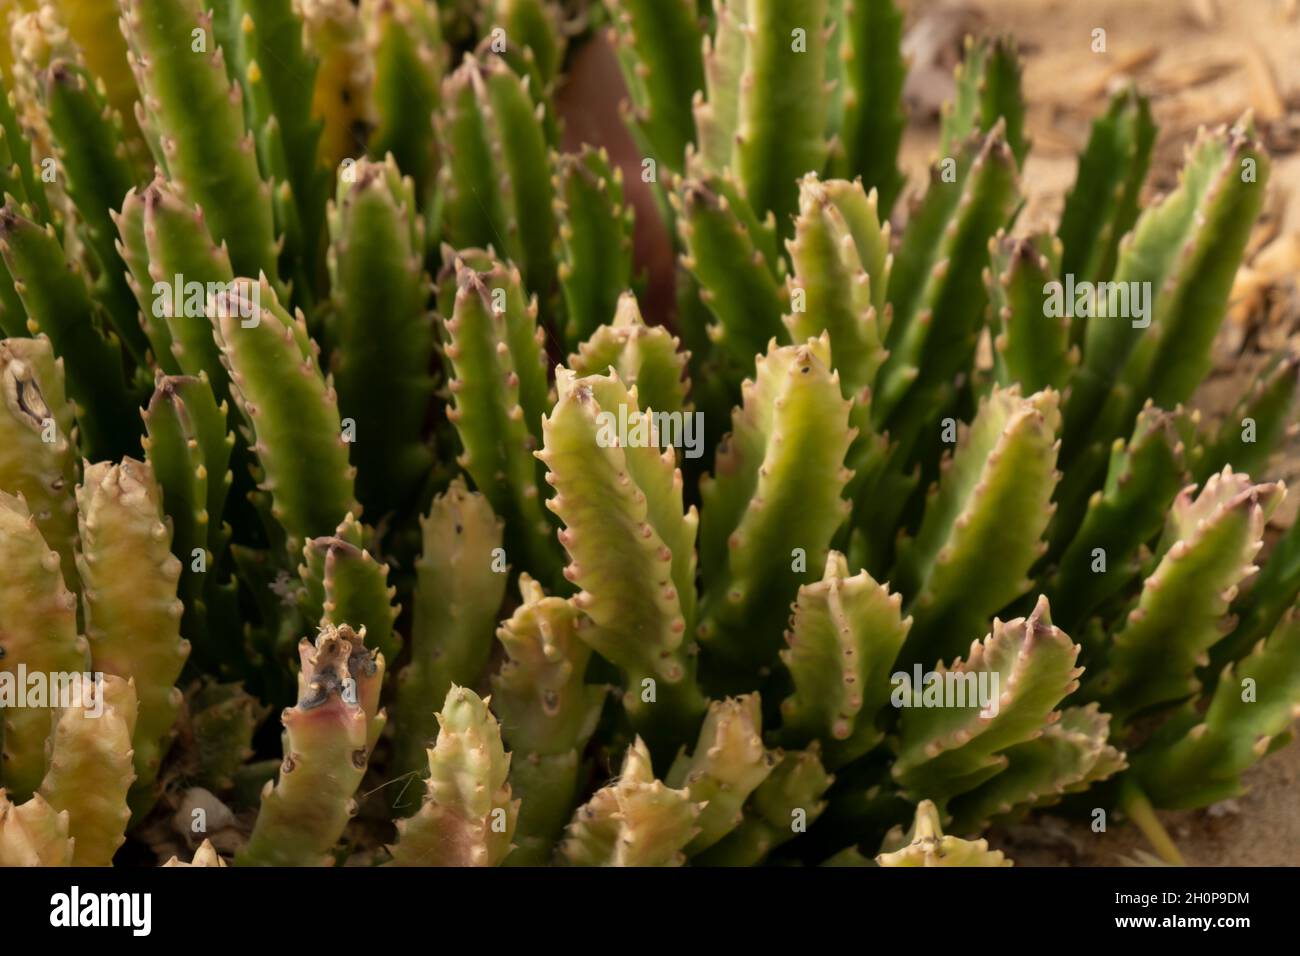 Stems of Stapelia hirsuta, common name starfish flower or carrion plant, a species of flowering plant belonging to the family Apocynaceae endemic to South Africa and southern Namibia Stock Photo